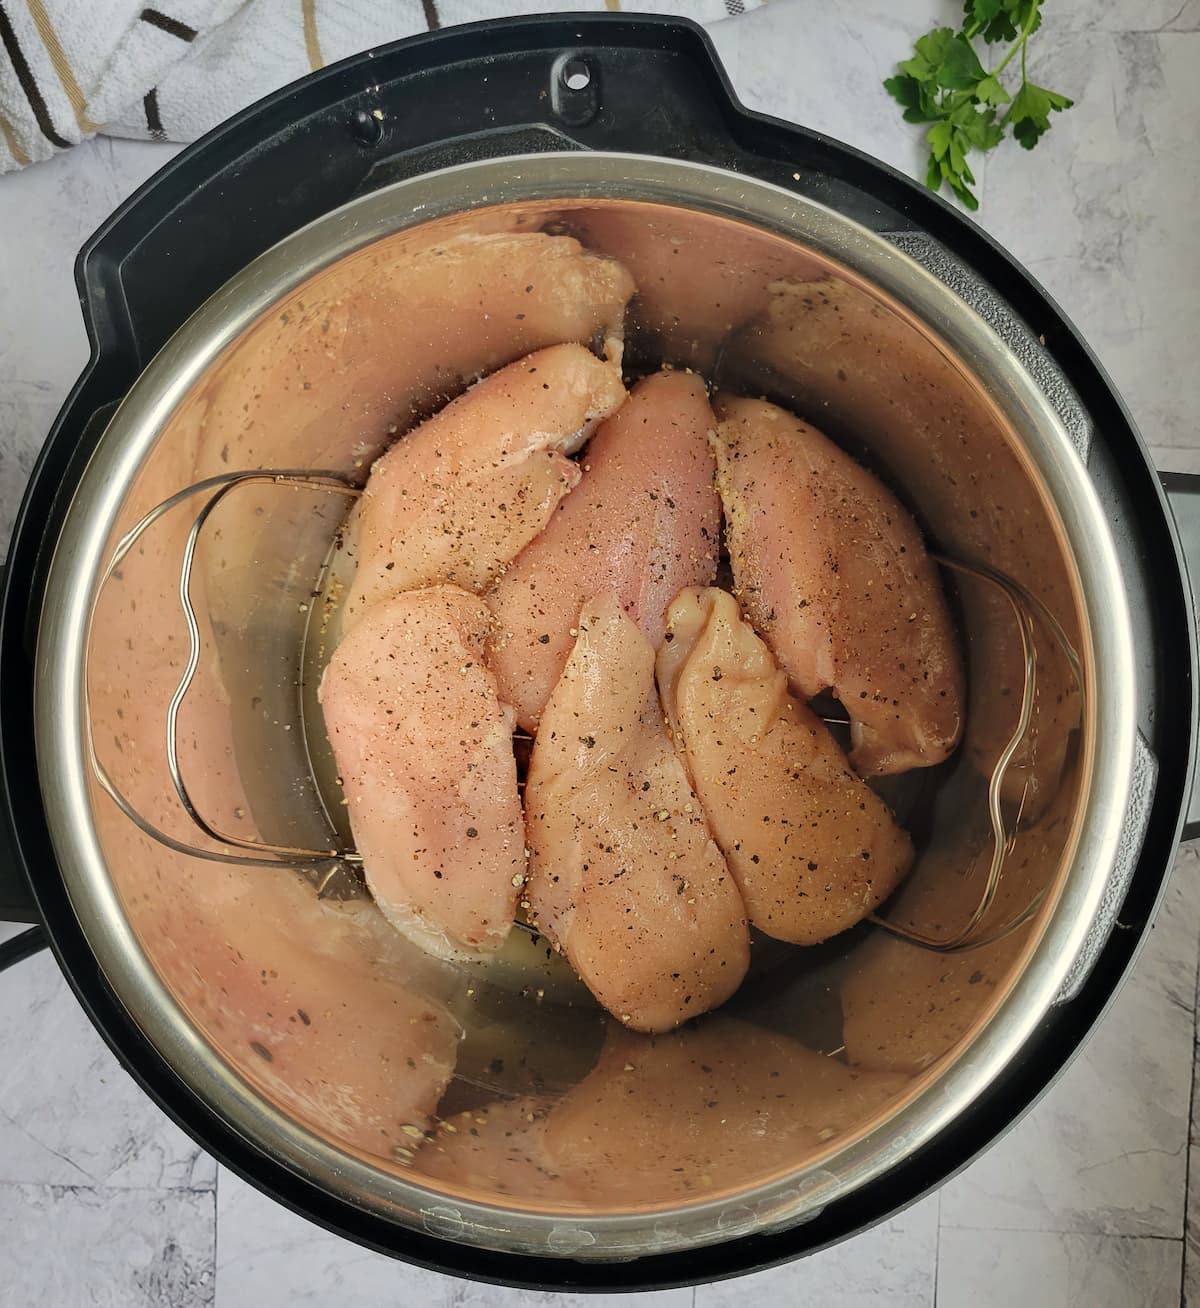 6 raw chicken breasts seasoned with salt and pepper on a metal trivet in an instant pot